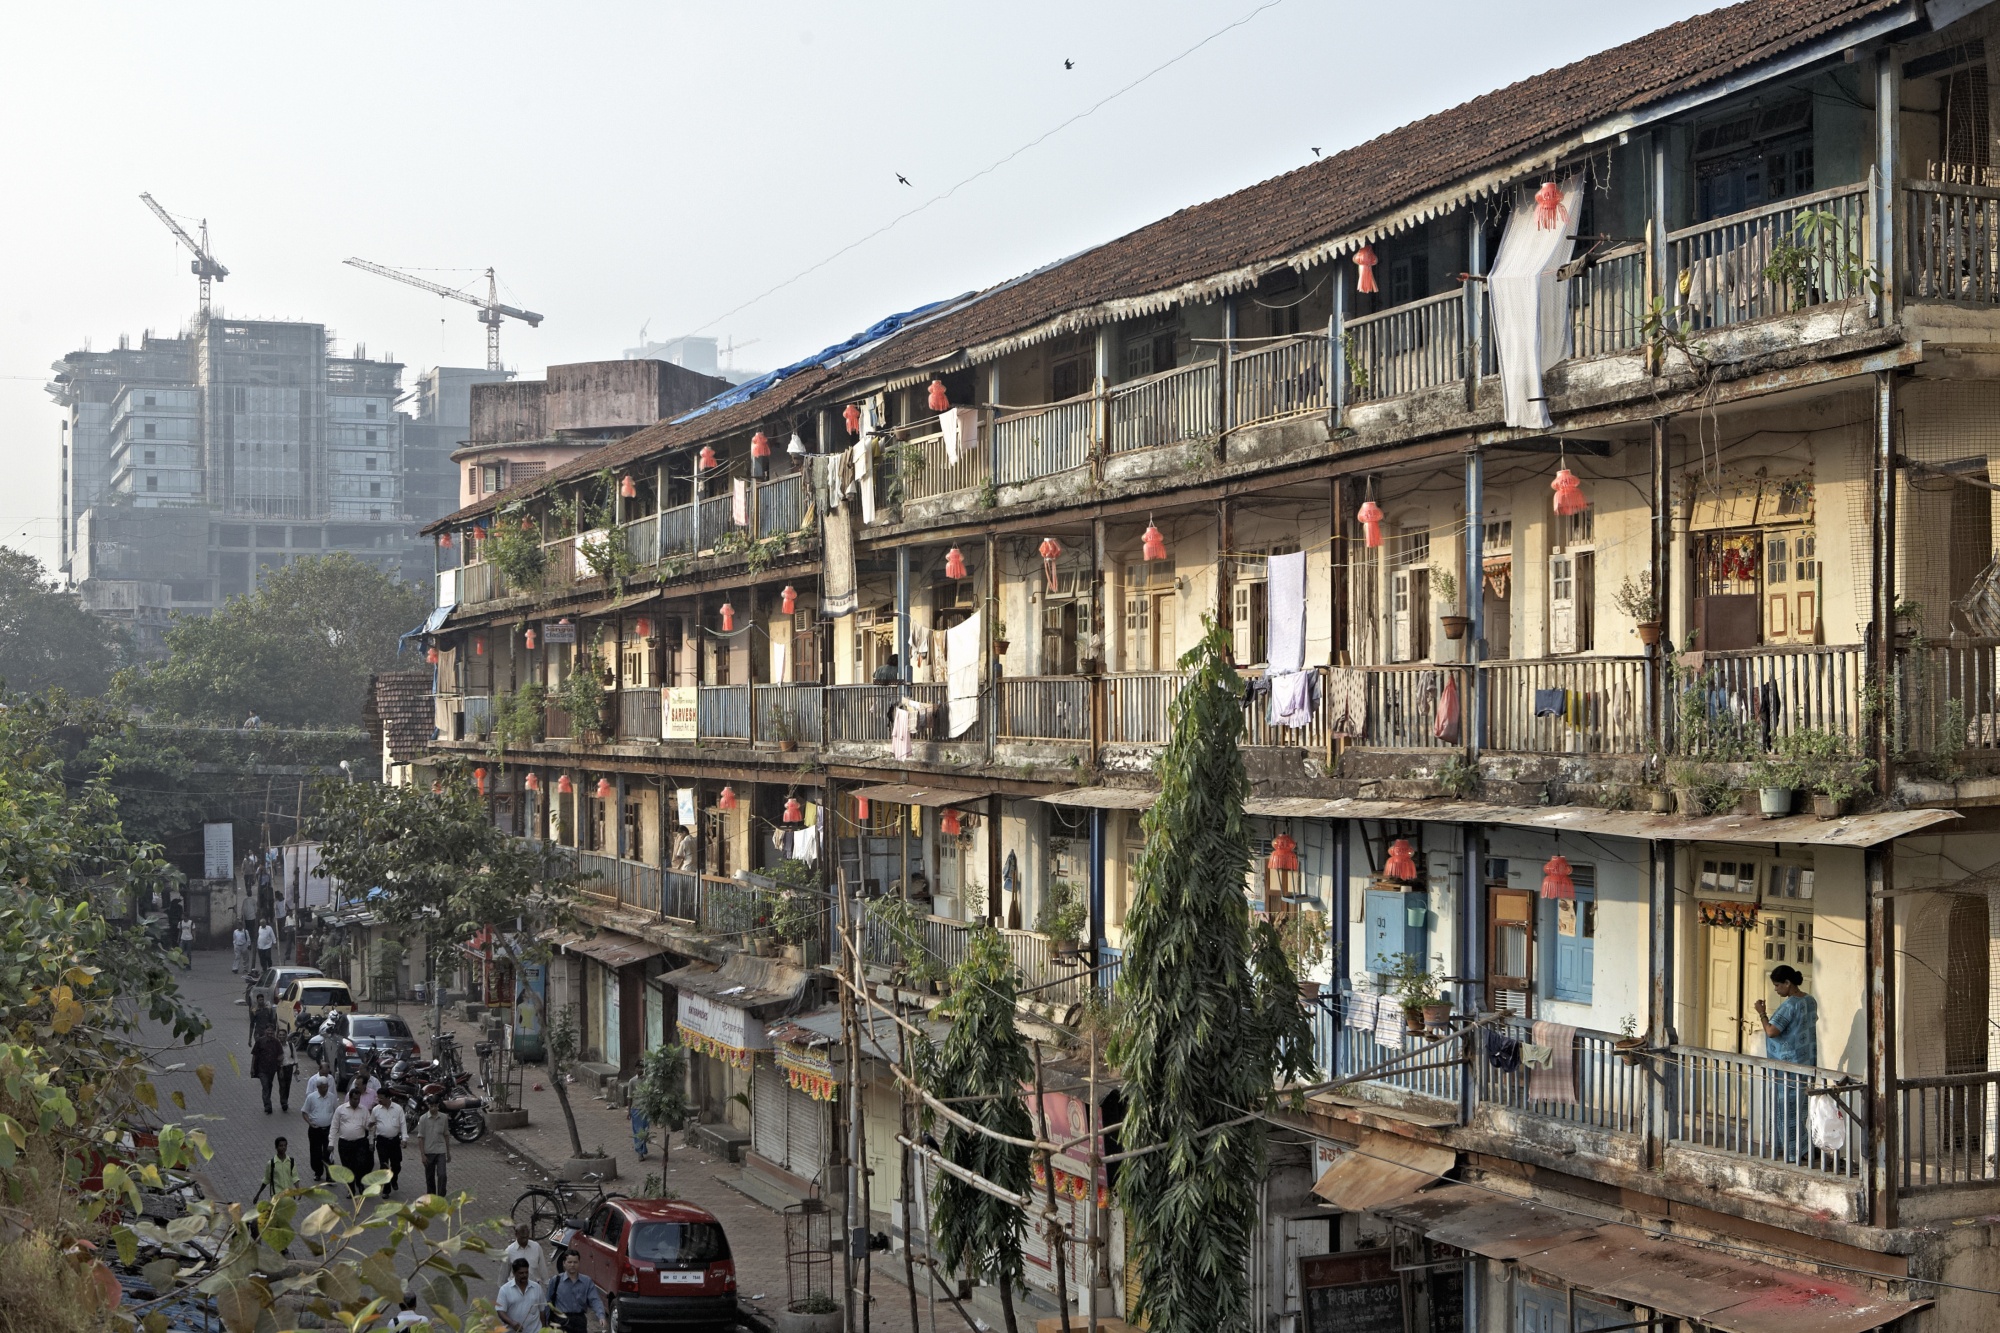 Mumbai Chawl Tenements Helped Build the Megacity. But They Are